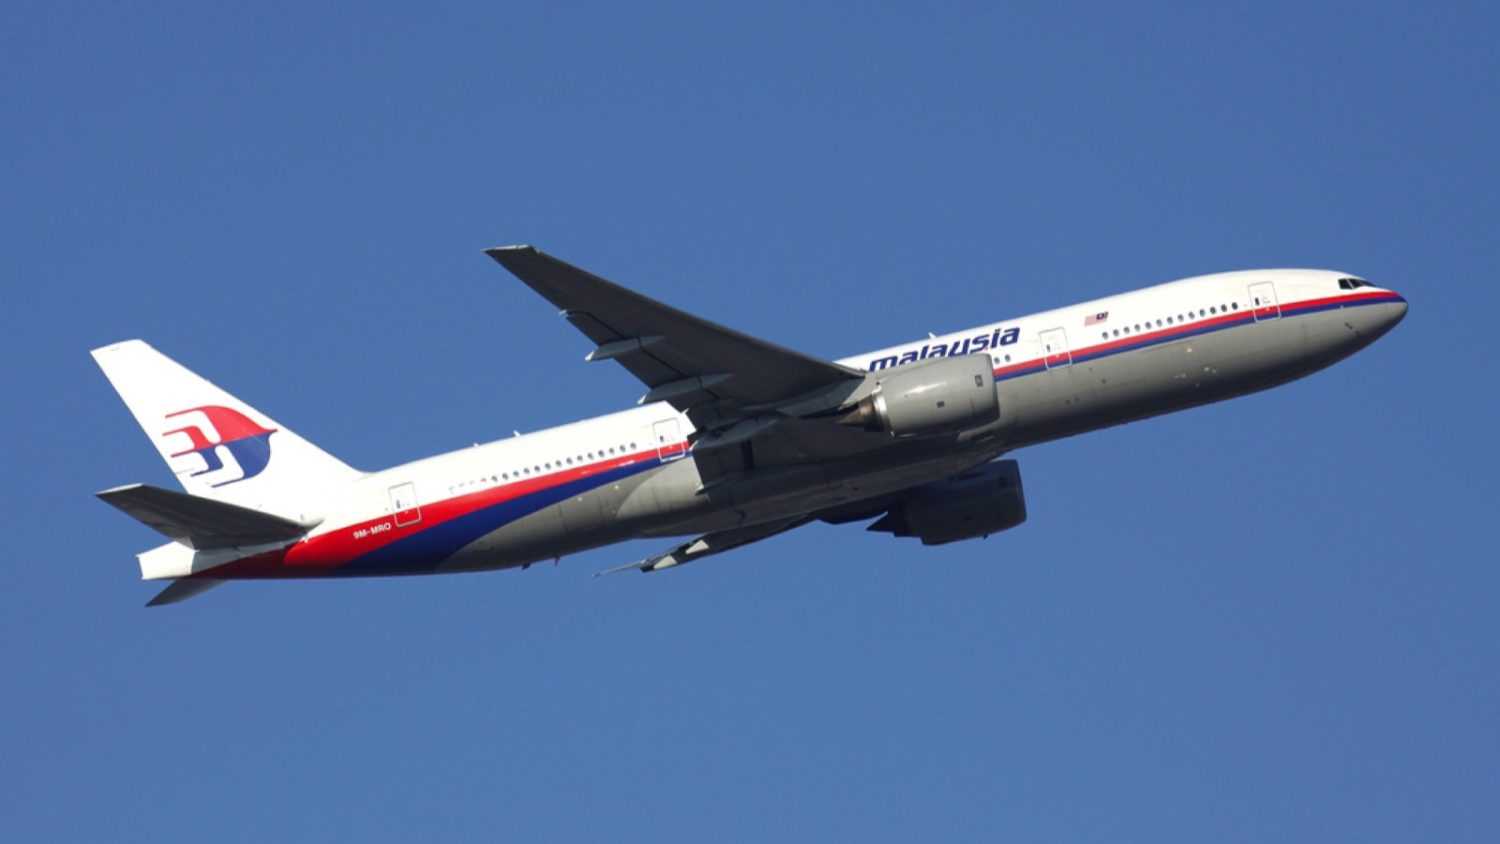 FRANKFURT AM MAIN, GERMANY - FEBRUARY 4, 2012: Malaysia Airlines Boeing 777-200 with registration 9M-MRO airborn at Frankfurt Airport. This aircraft disappeared on flight MH370 on 8 March 2014.